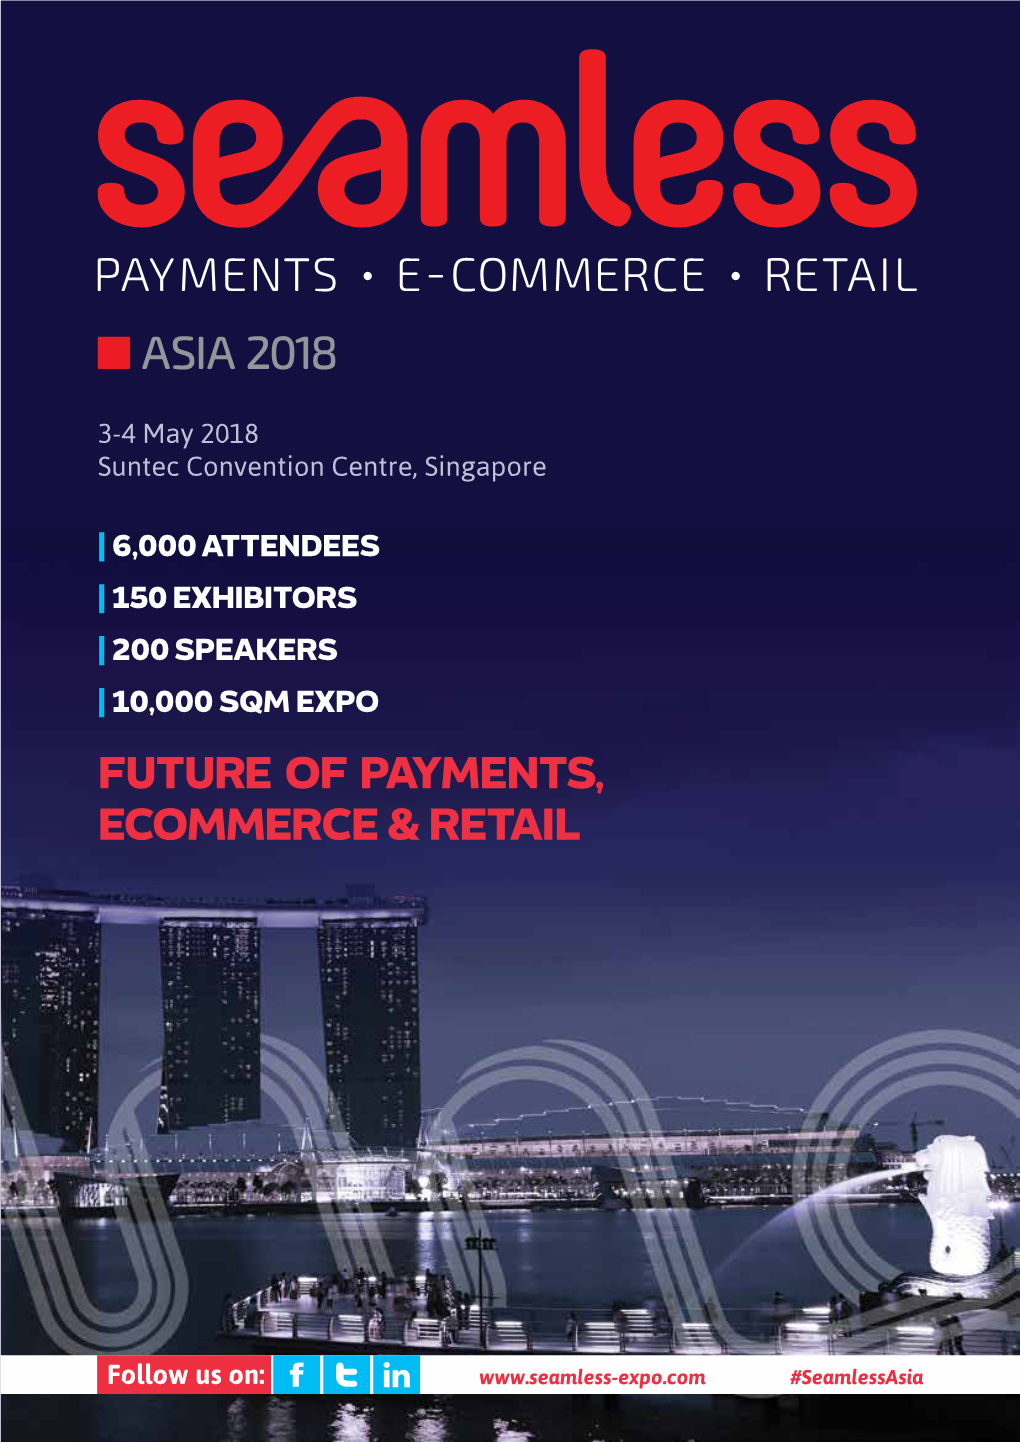 Future of Payments, Ecommerce & Retail